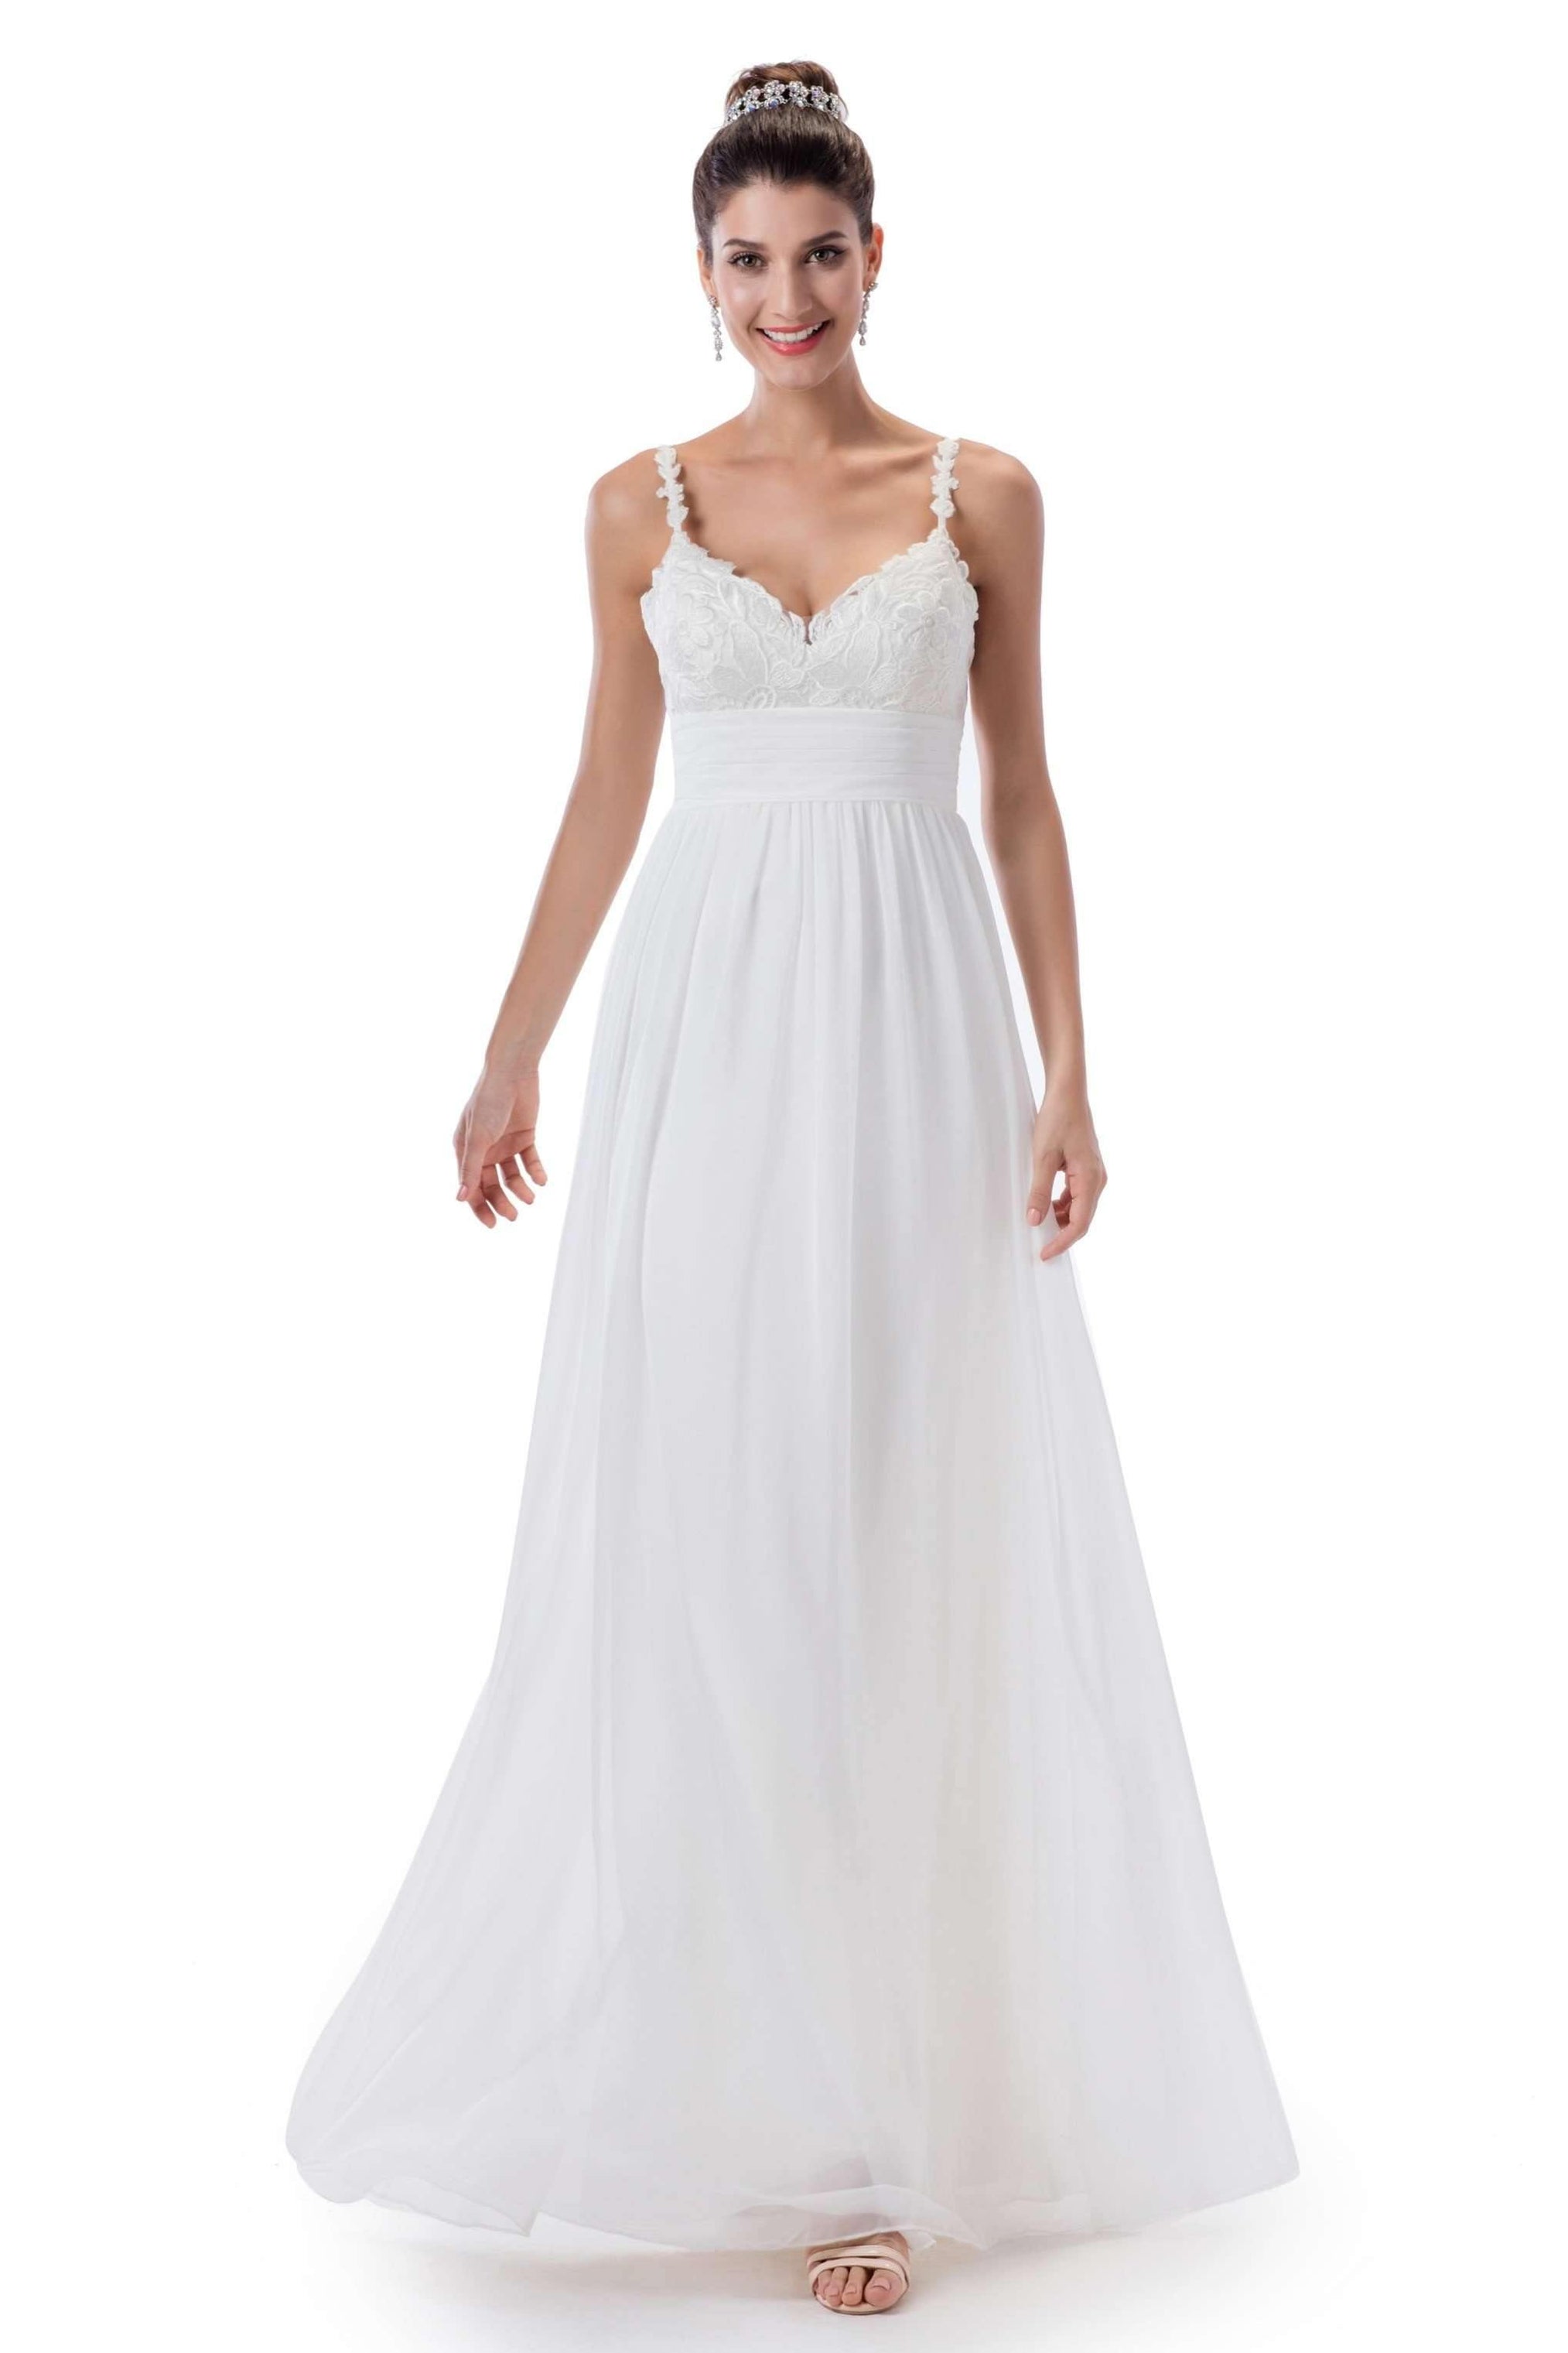 All Bridal Gowns — Adore Bridal and Occasion Wear